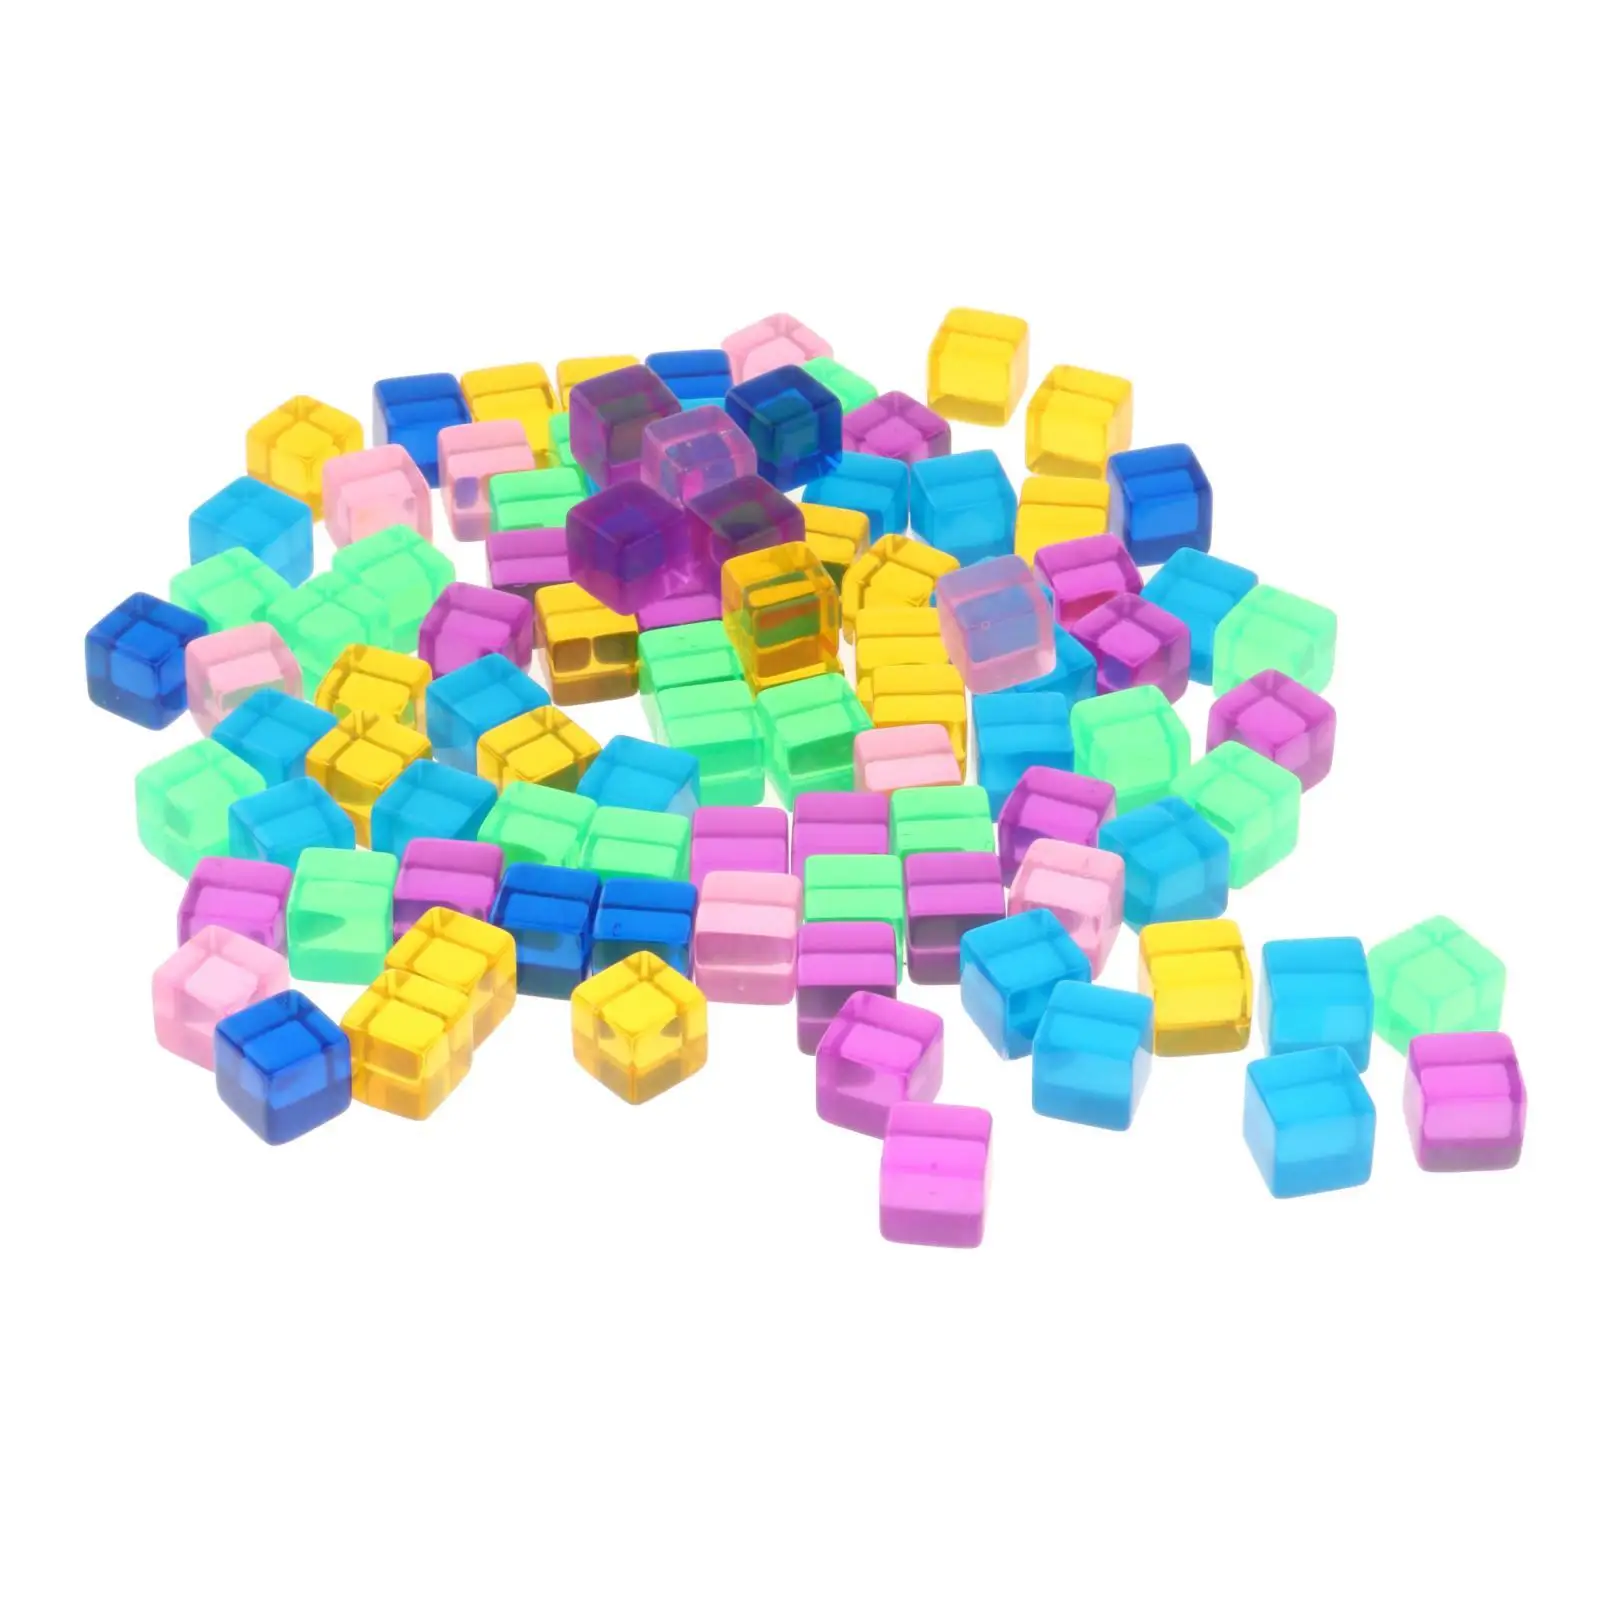 100 Pieces D6 16mm Transparent Blank Dices Translucent Colors Colorful Dice Square Dice for Party Favors Puzzle Game Dice Games